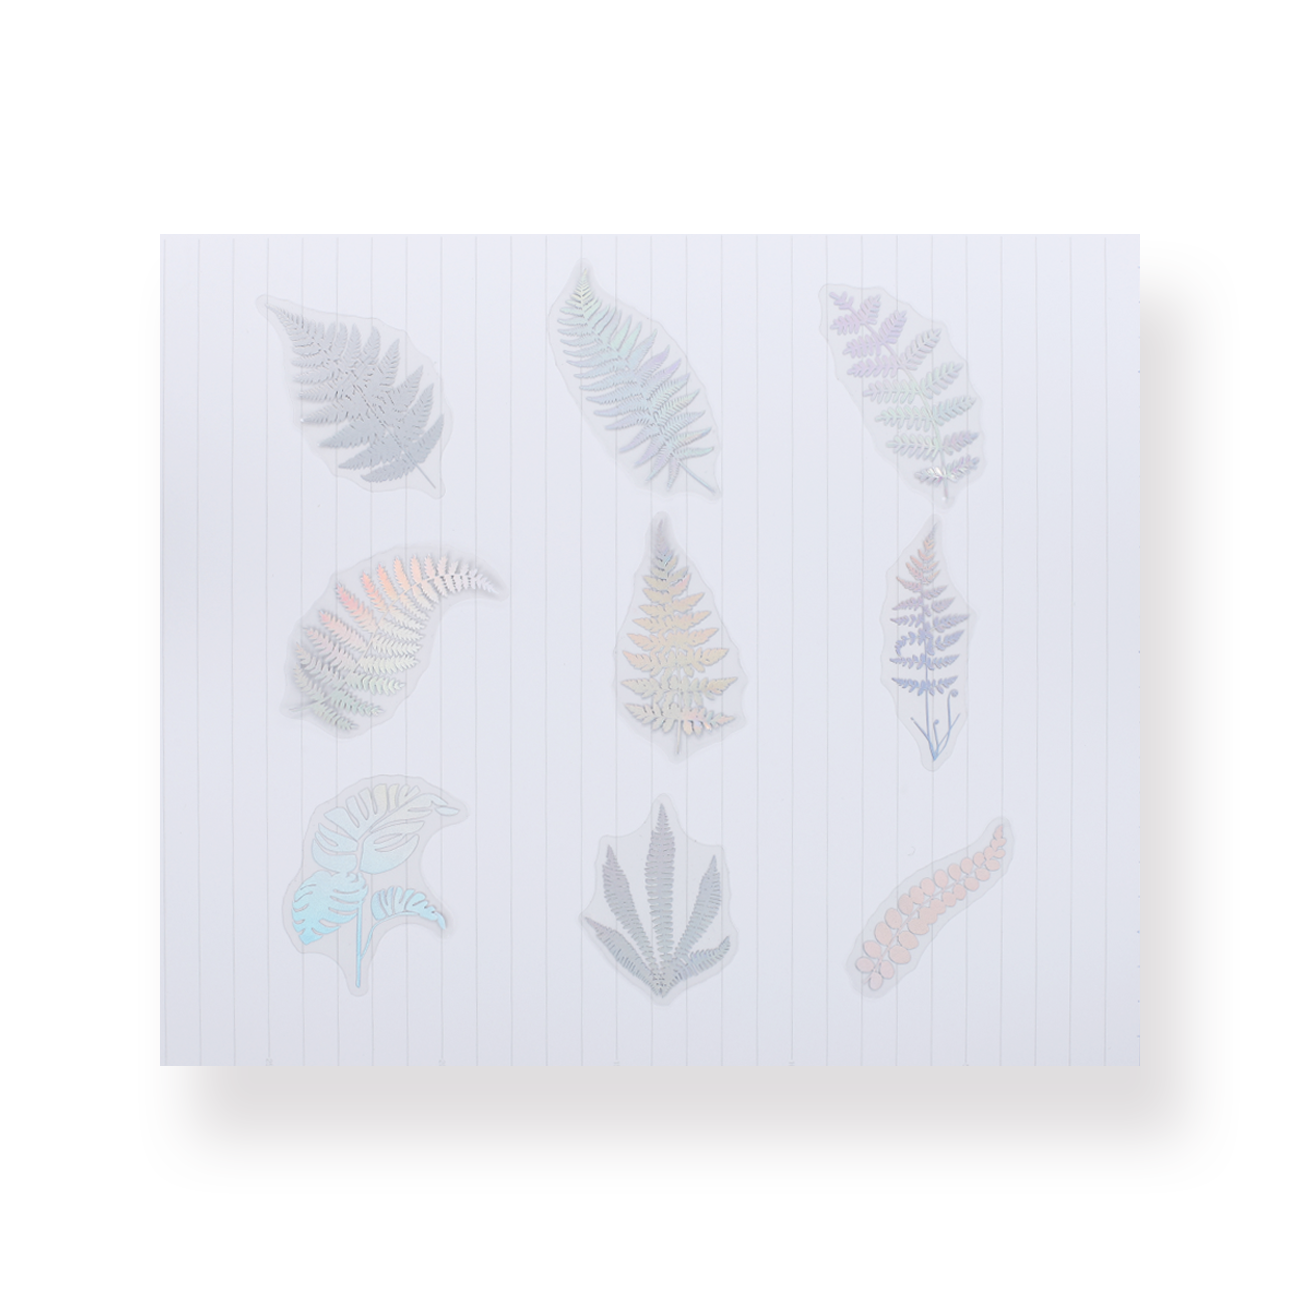 Holographic Sticker Pack - Leaves - Stationery Pal